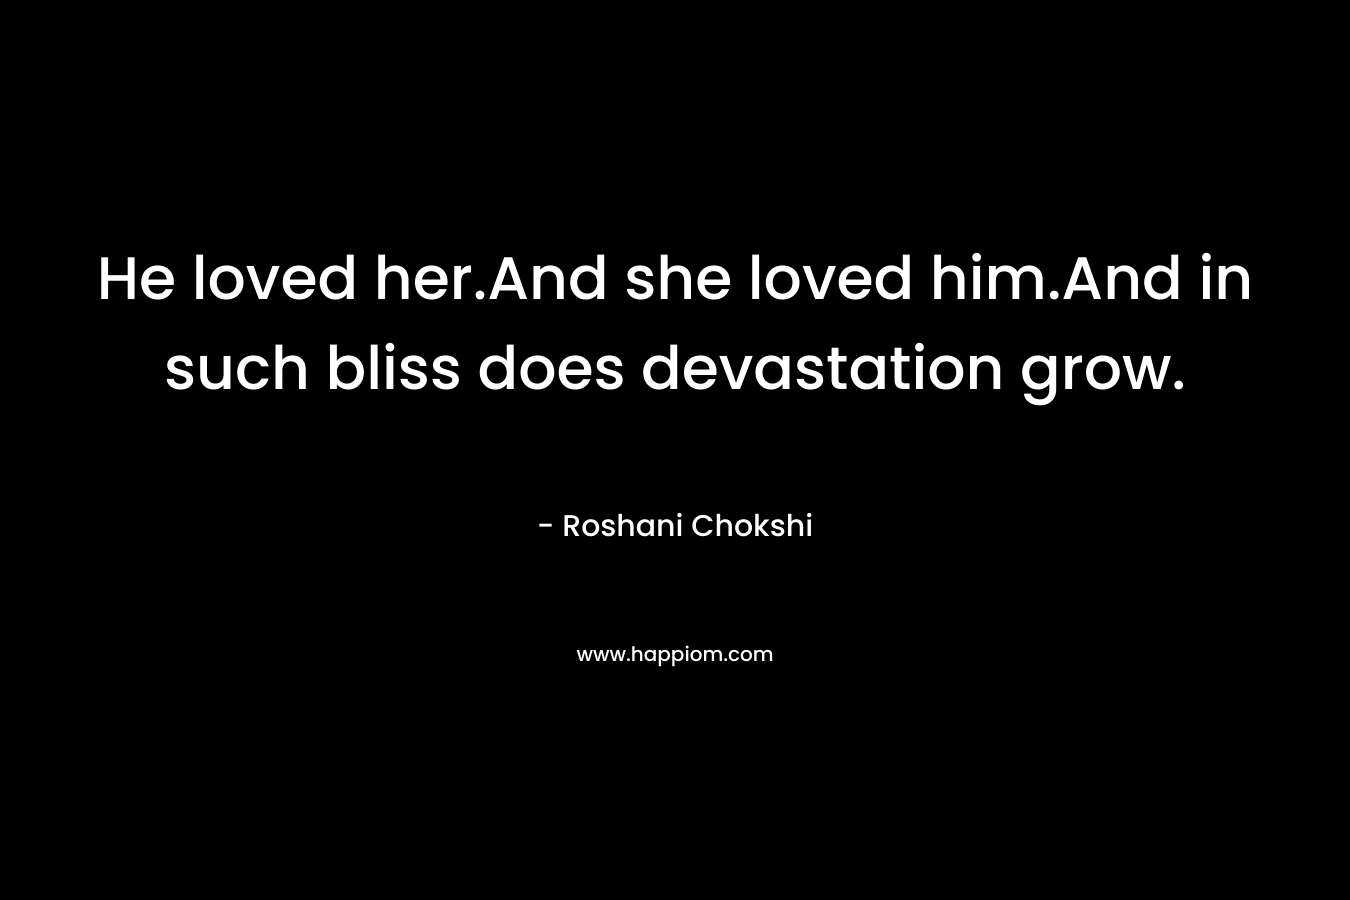 He loved her.And she loved him.And in such bliss does devastation grow. – Roshani Chokshi